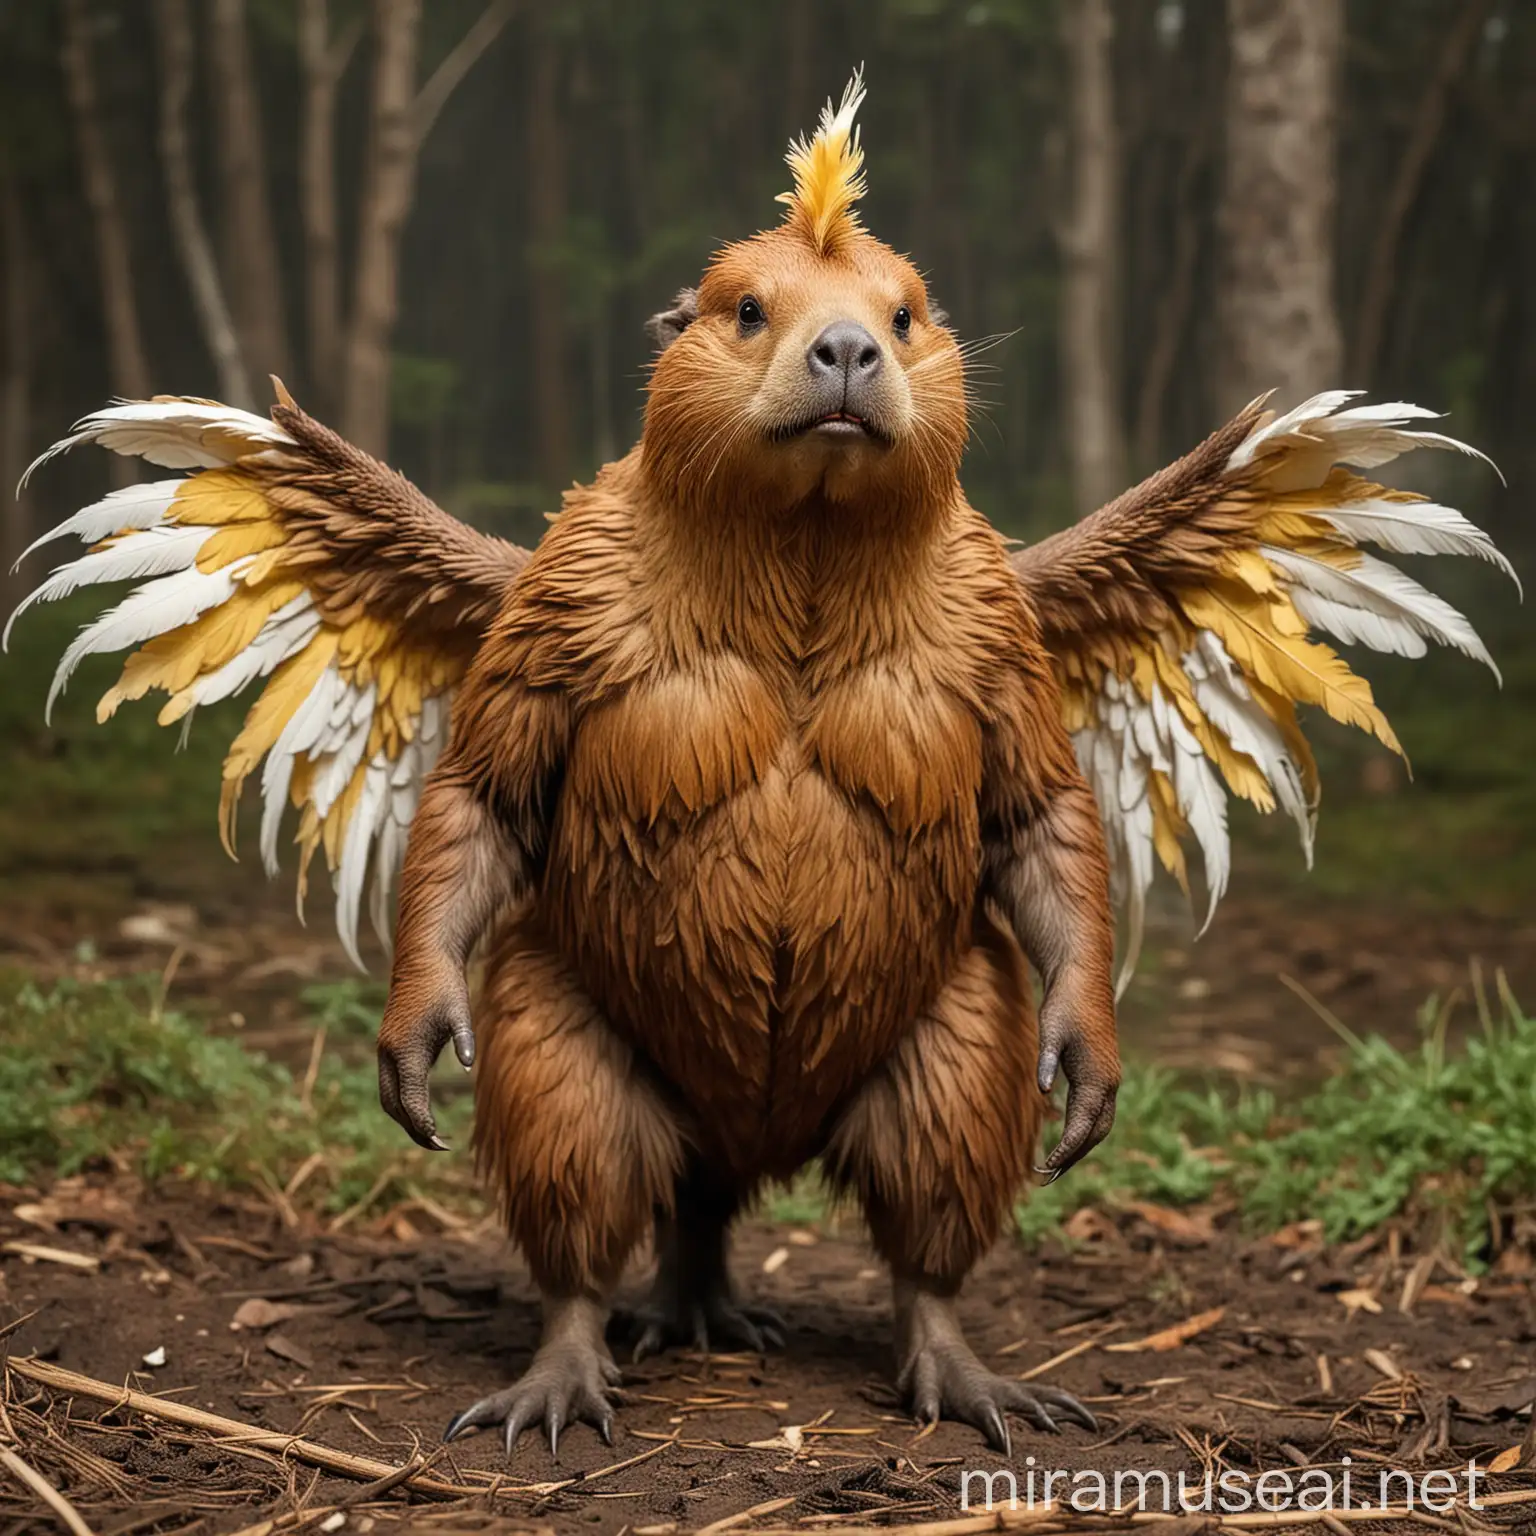 Imagine an animal that is a bizarre mixture of beaver and chicken. This creature has a sturdy beaver body, shiny brown fur and a distinctive flat tail that sticks out from behind its back. A head like a mammoth, with large white tusks and a trunk like an elephant, and large ears, This unique animal has colored wings like a rooster, 2 yellow legs covered with scales like chickens. There are 3 toes on each foot, with claws like chickens.